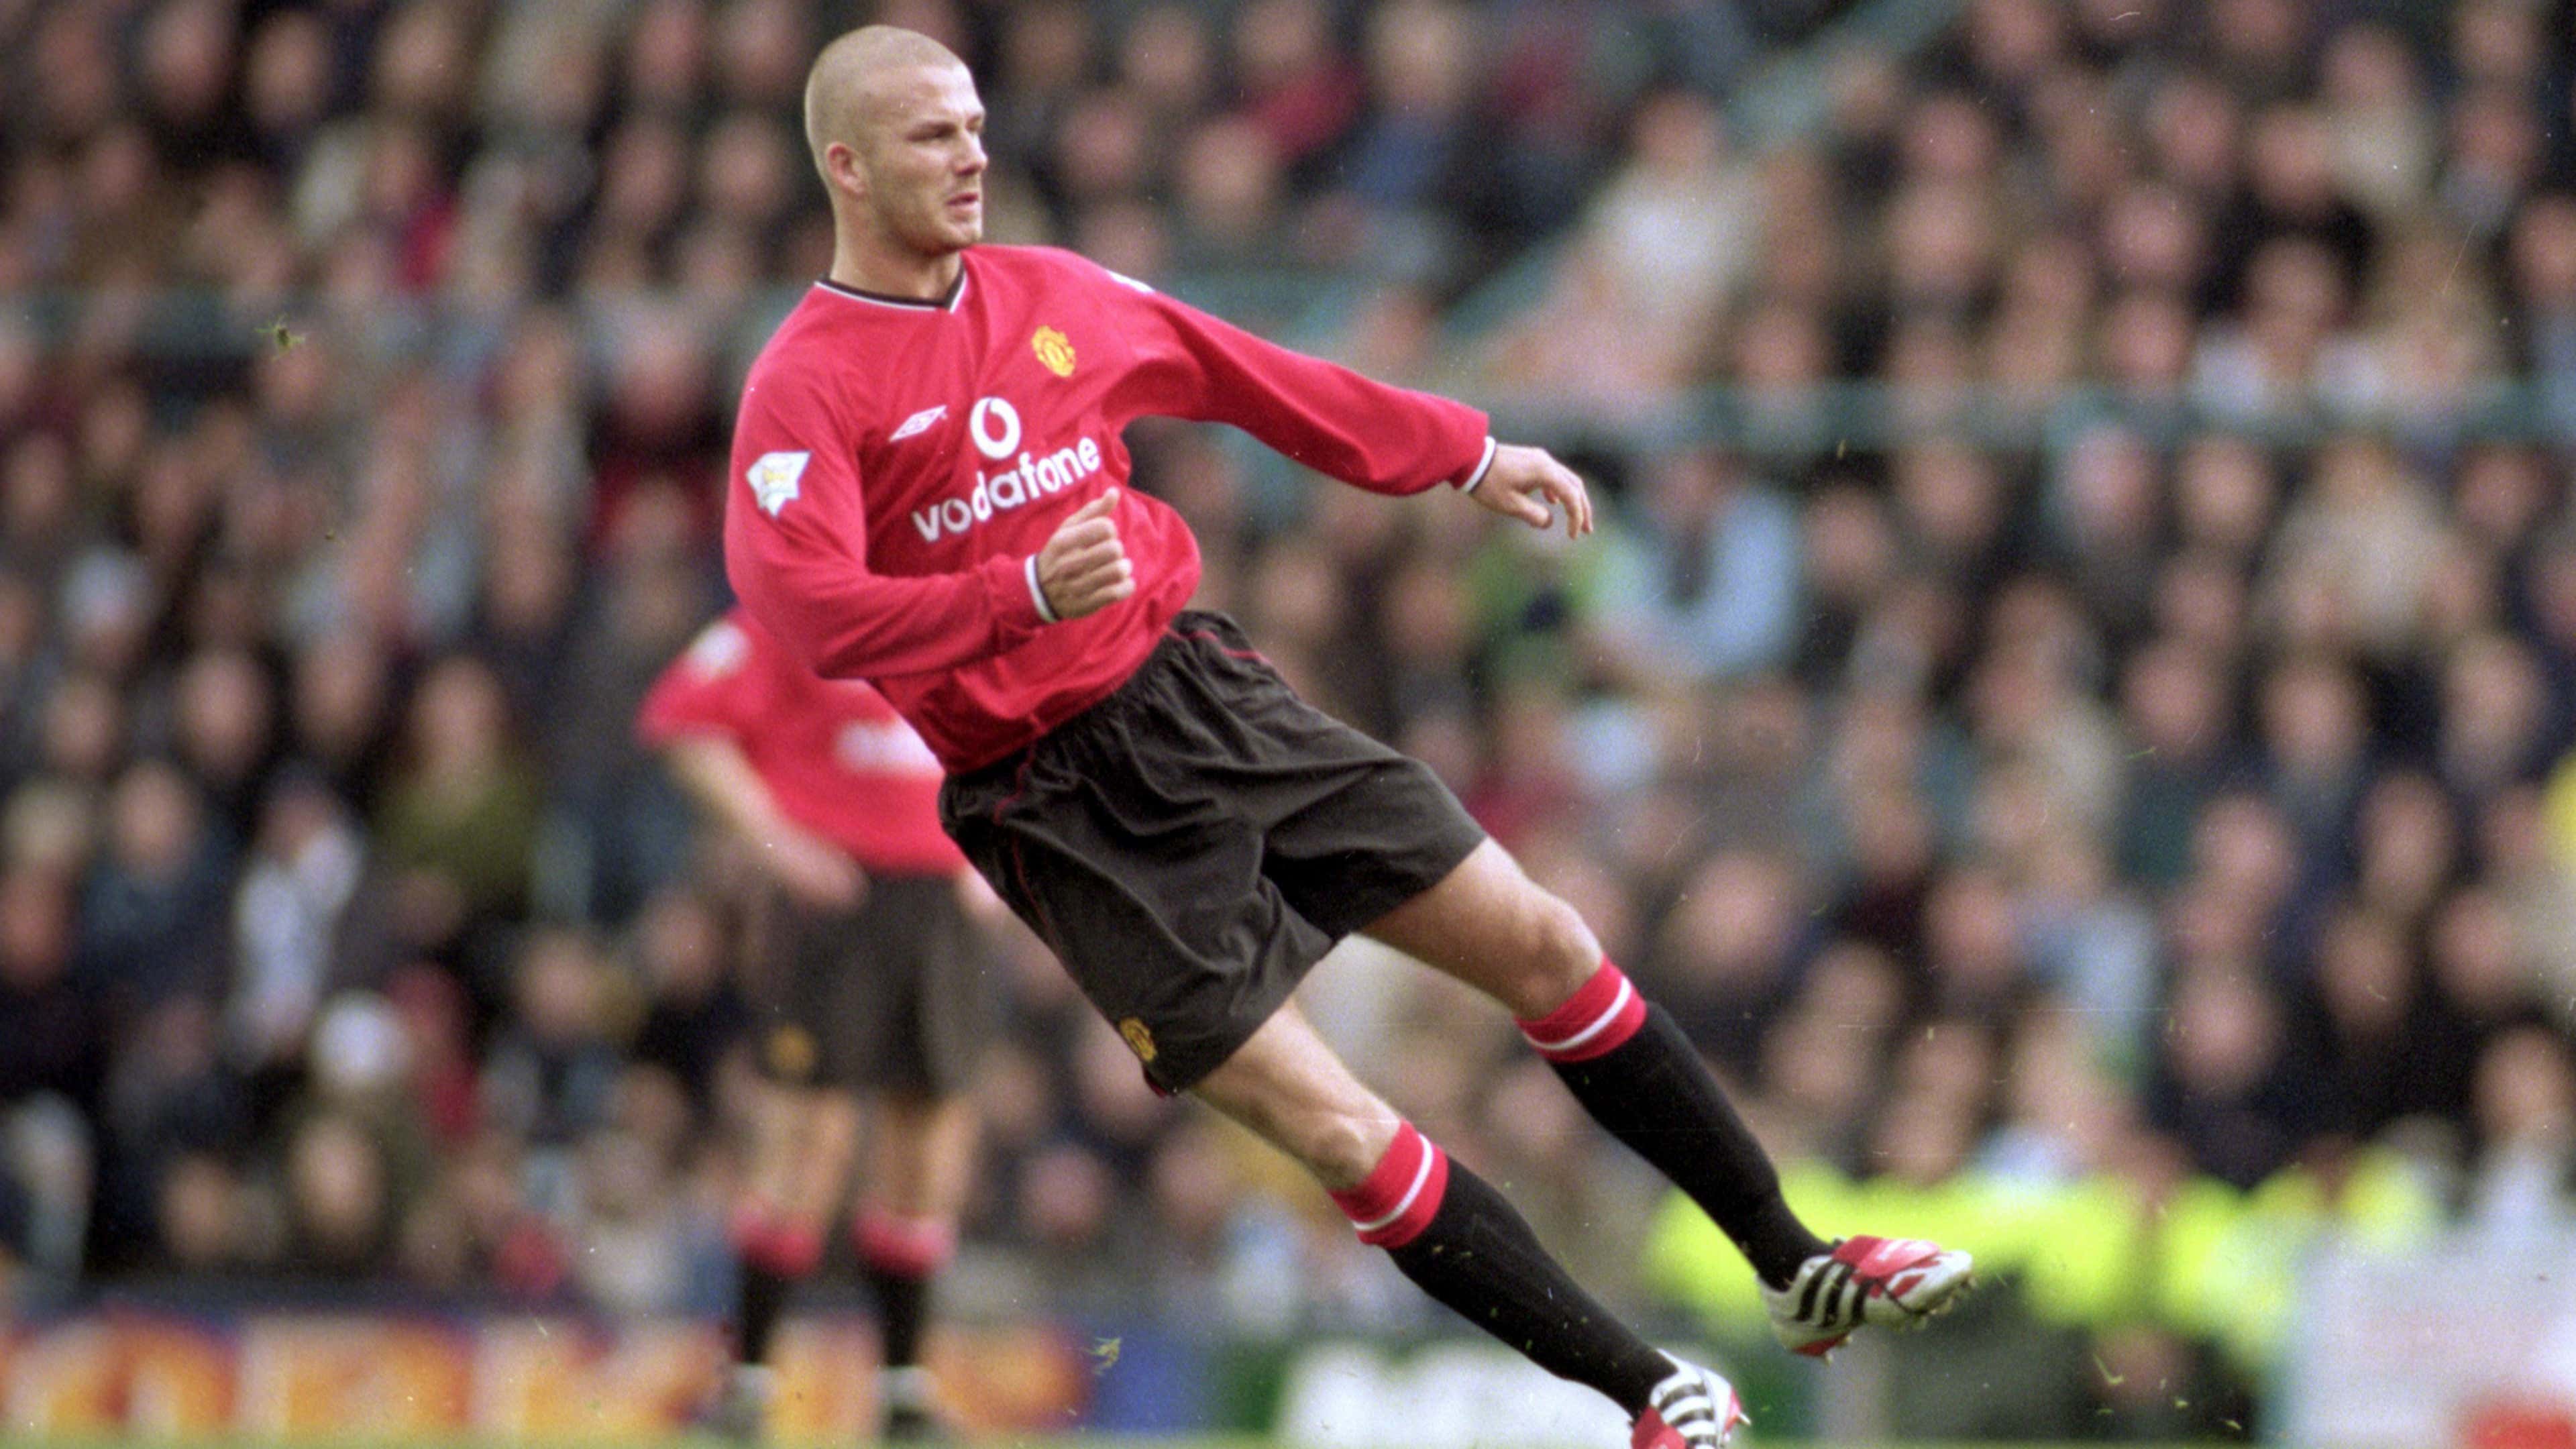 David Beckham Has Picked His Greatest Adidas Predator Of All-Time